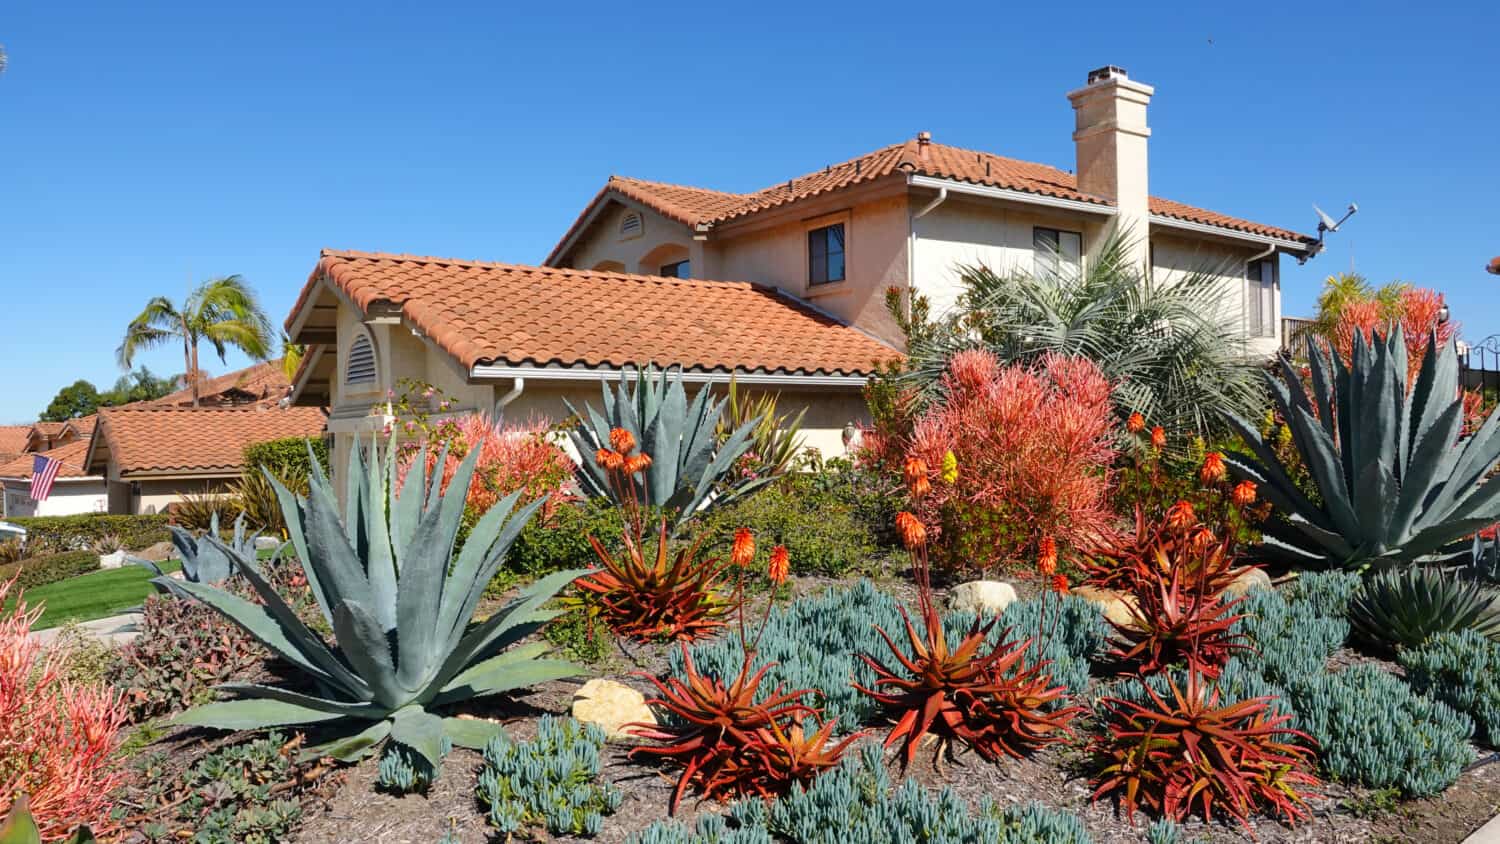 Drought tolerant landscaping in Southern California by Simone Hogan